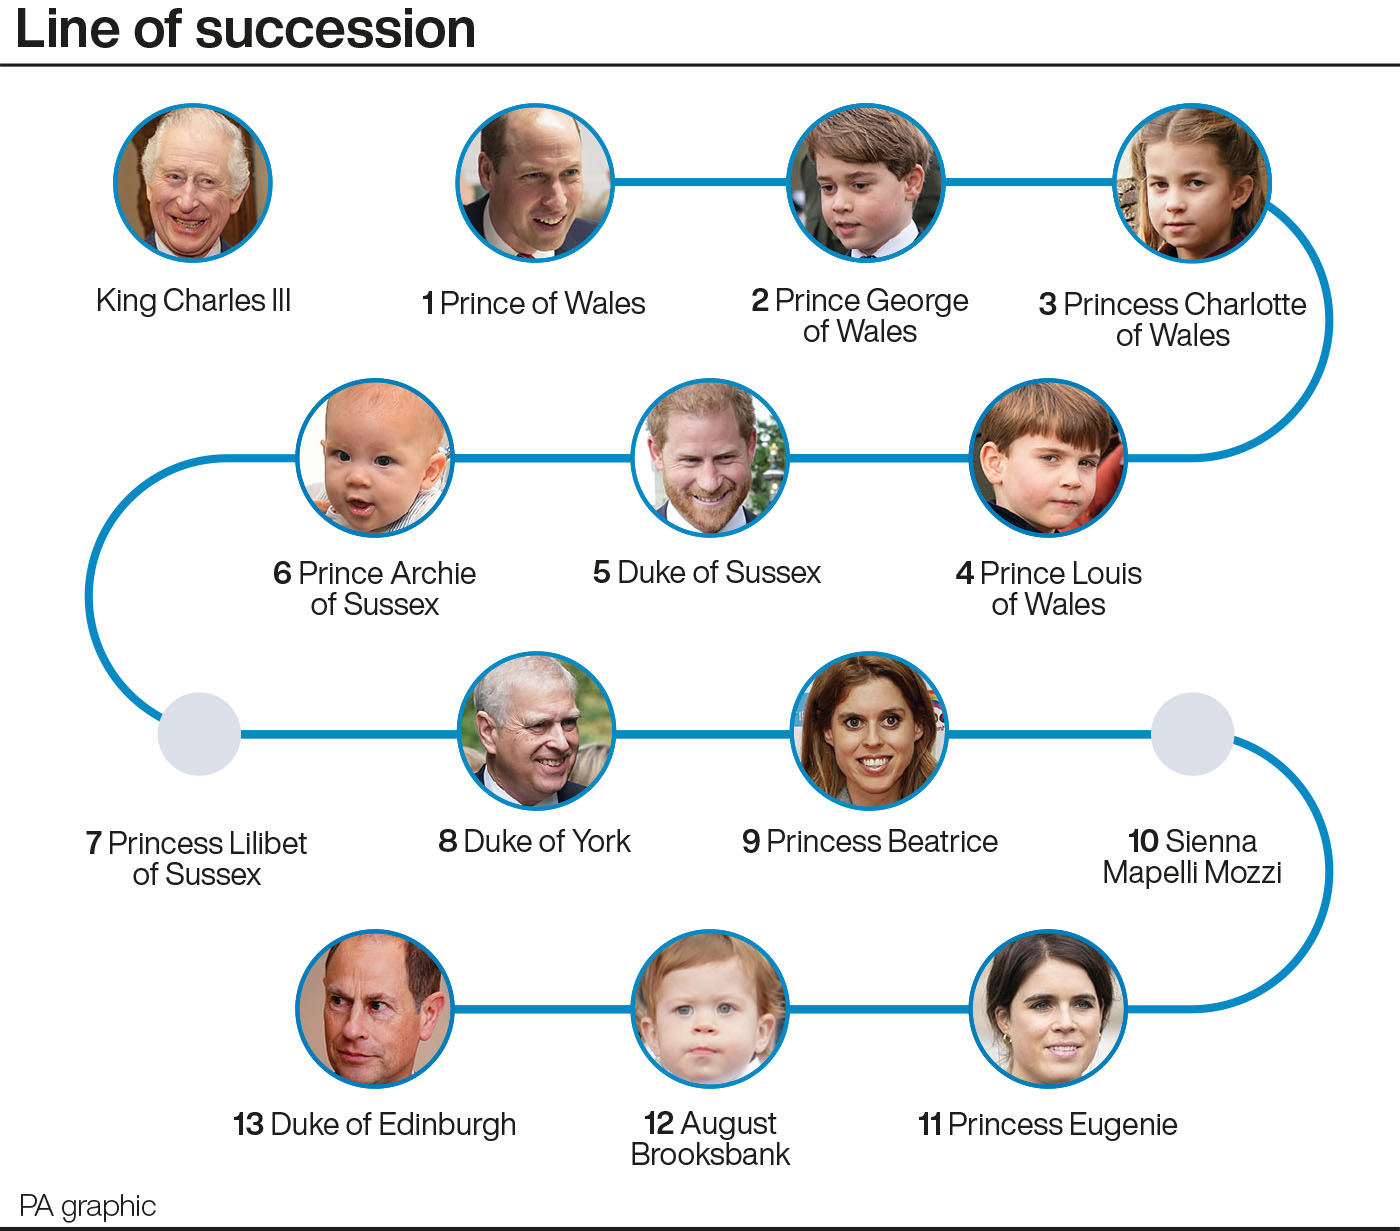 Graphic showing King Charles III's line of succession